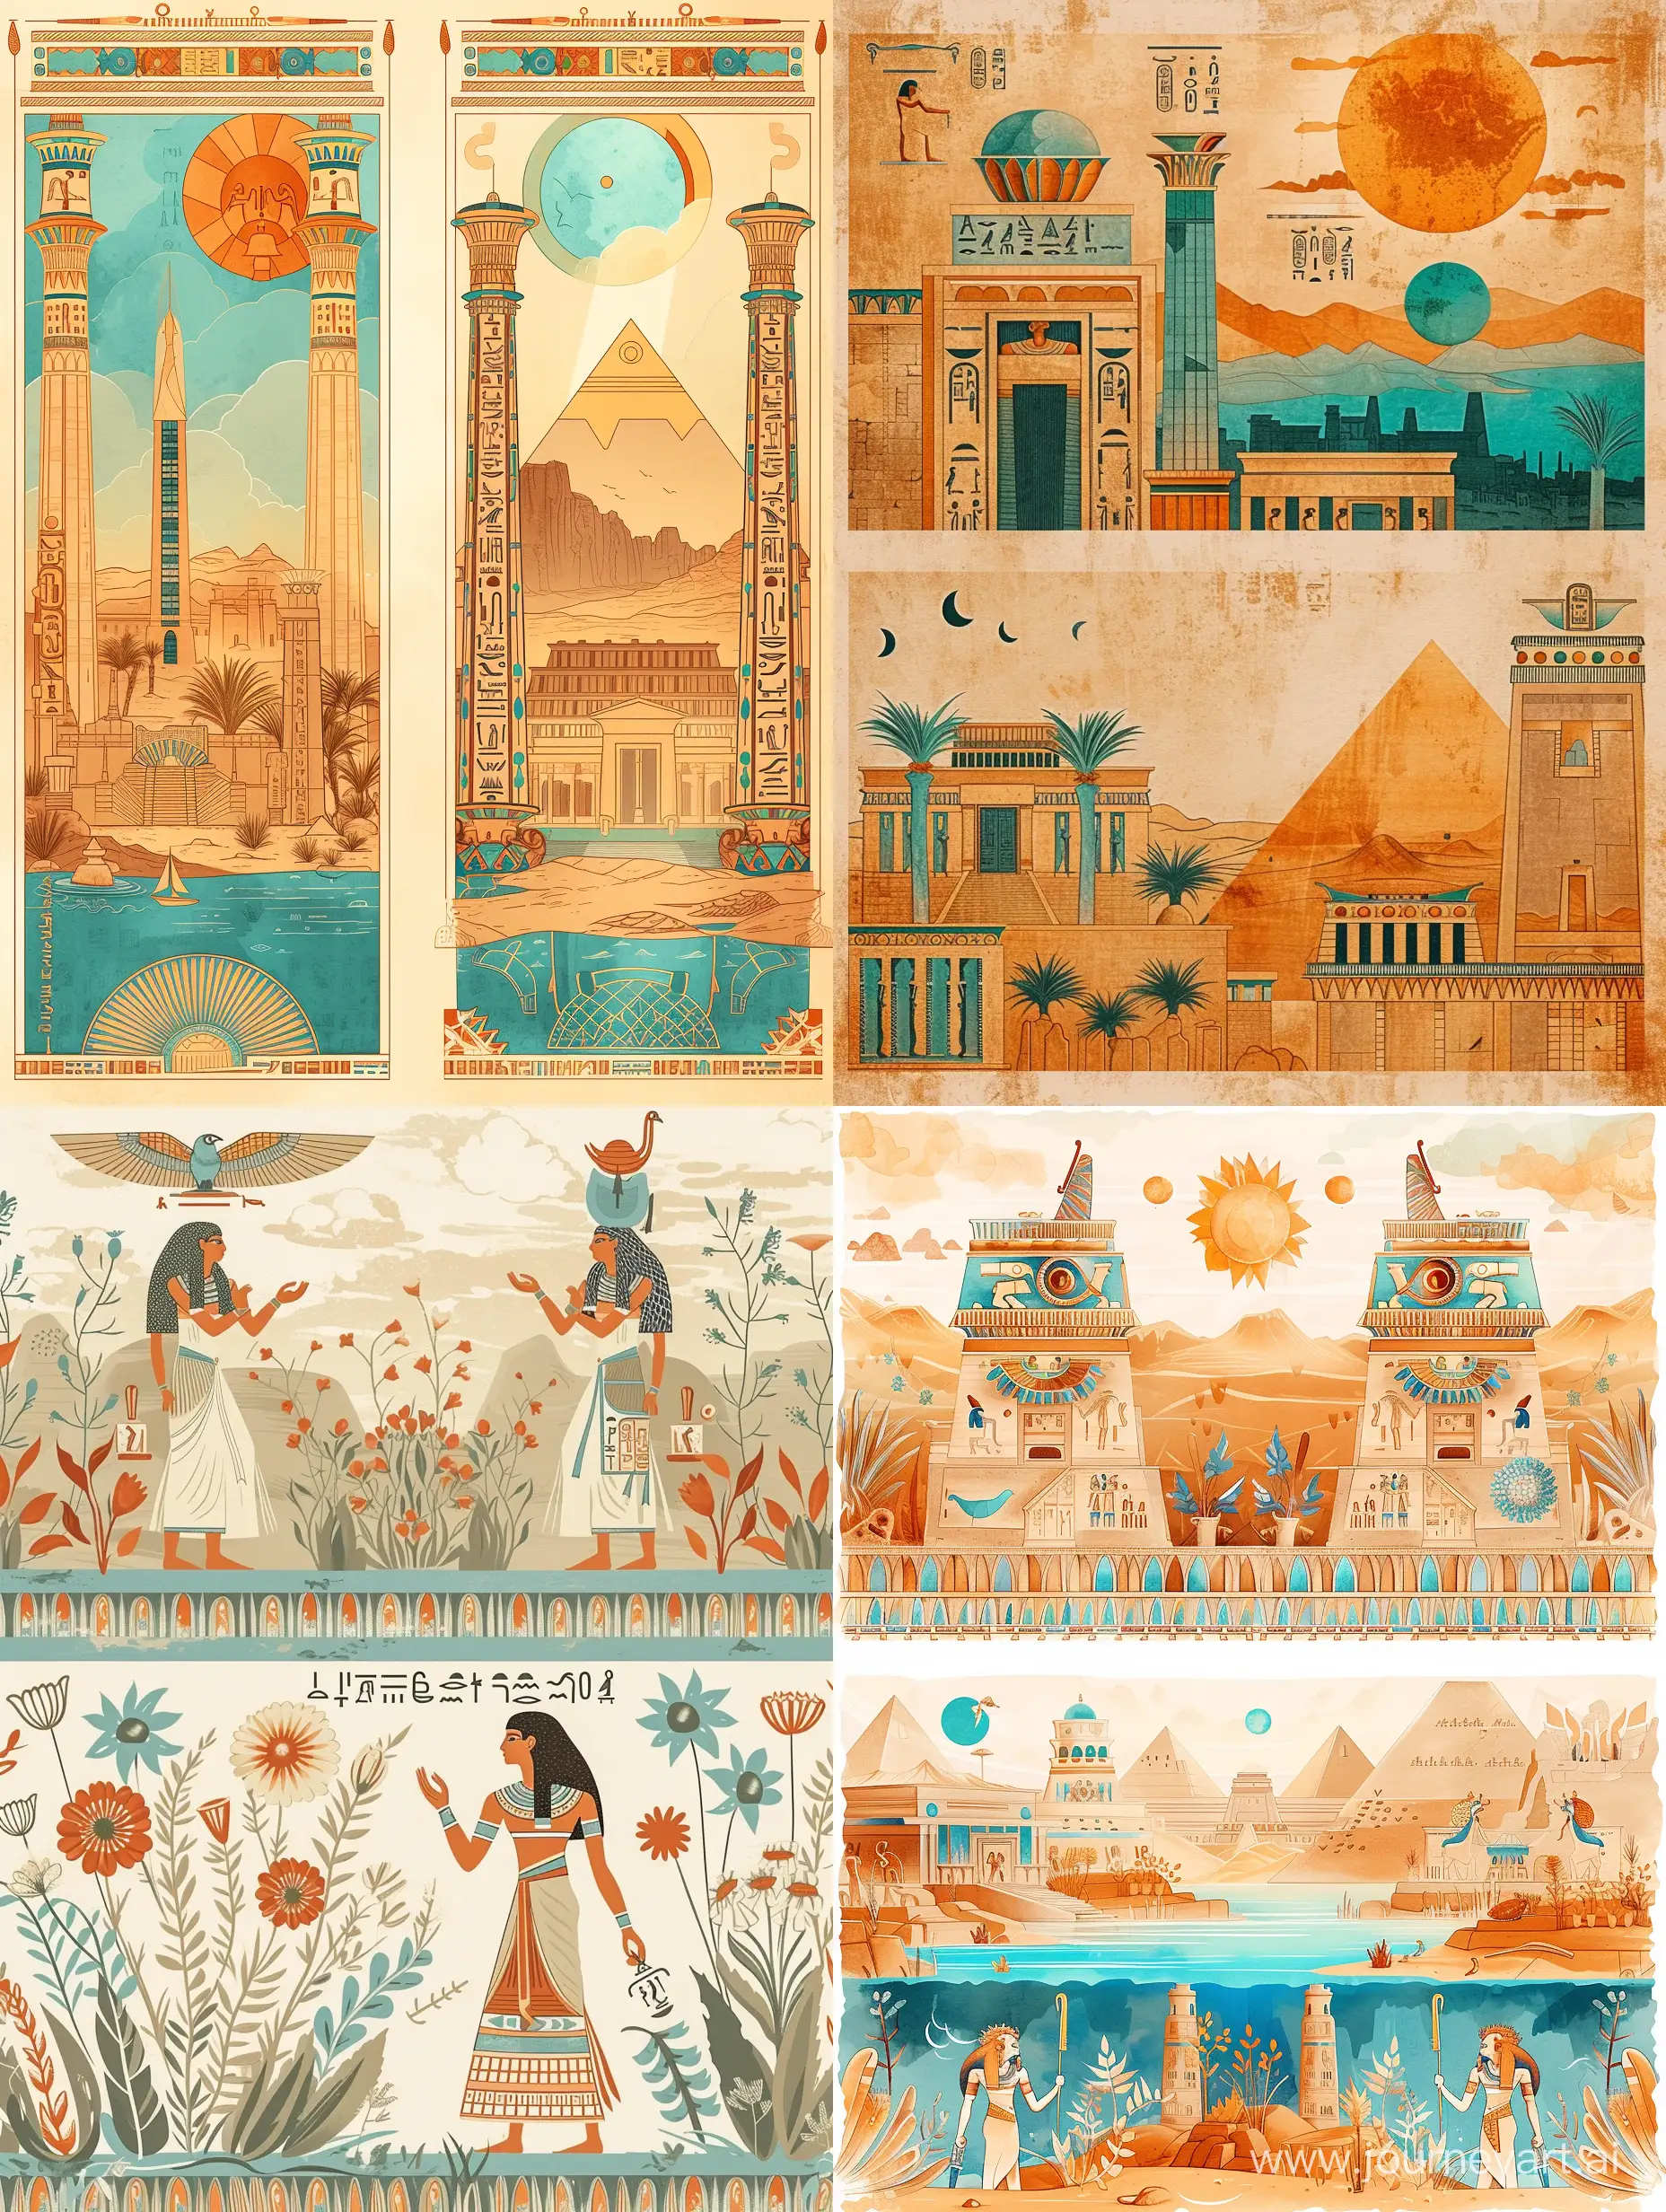 Ancient-Egyptian-Civilization-Landscape-Art-Delicate-Ornamental-Background-in-Old-Style